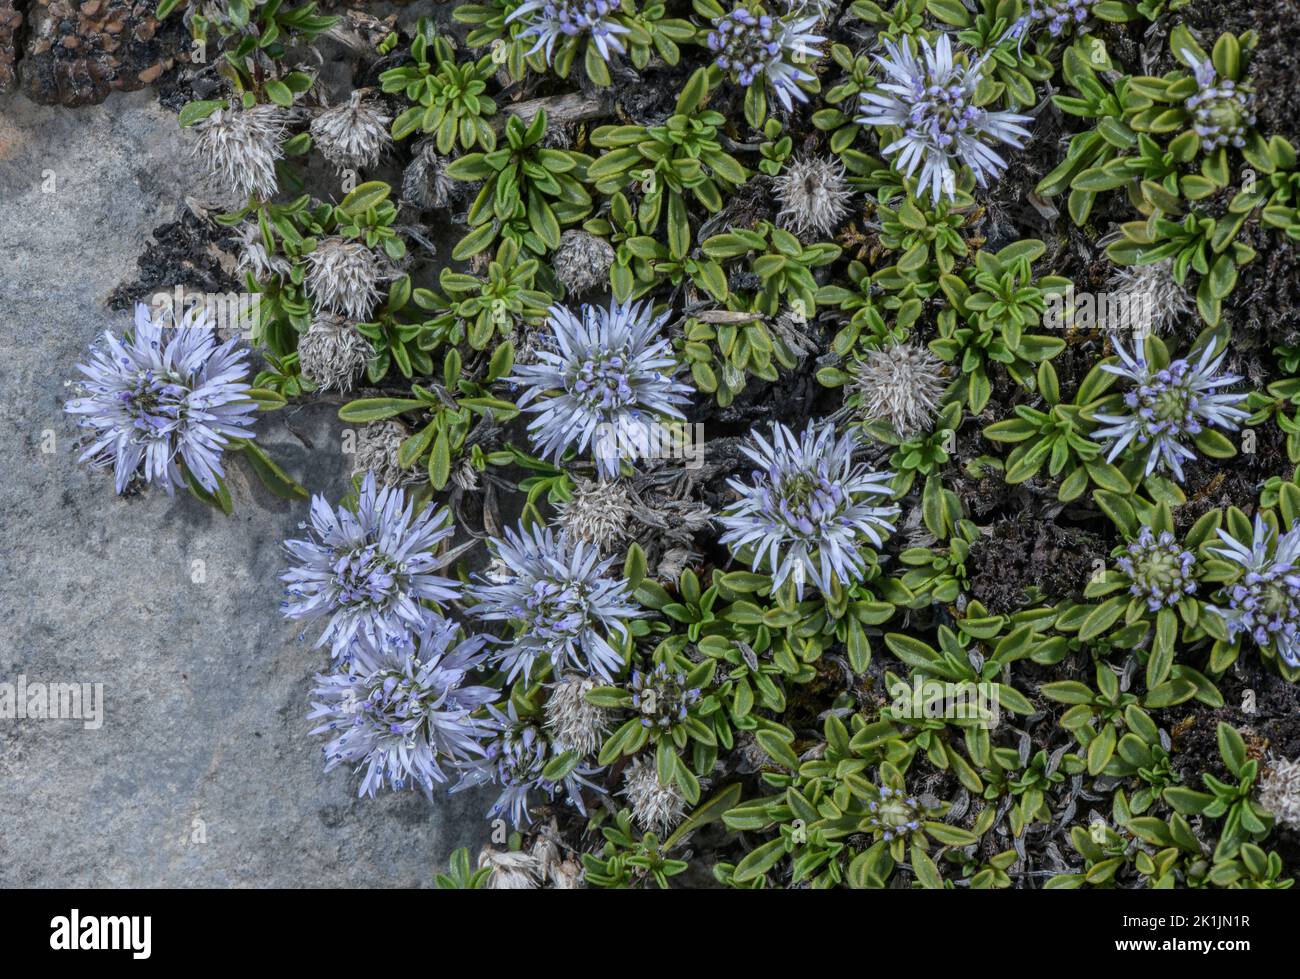 Thyme-leaved globe daisy, Globularia repens, in flower on limestone cliff, Pyrenees. Stock Photo